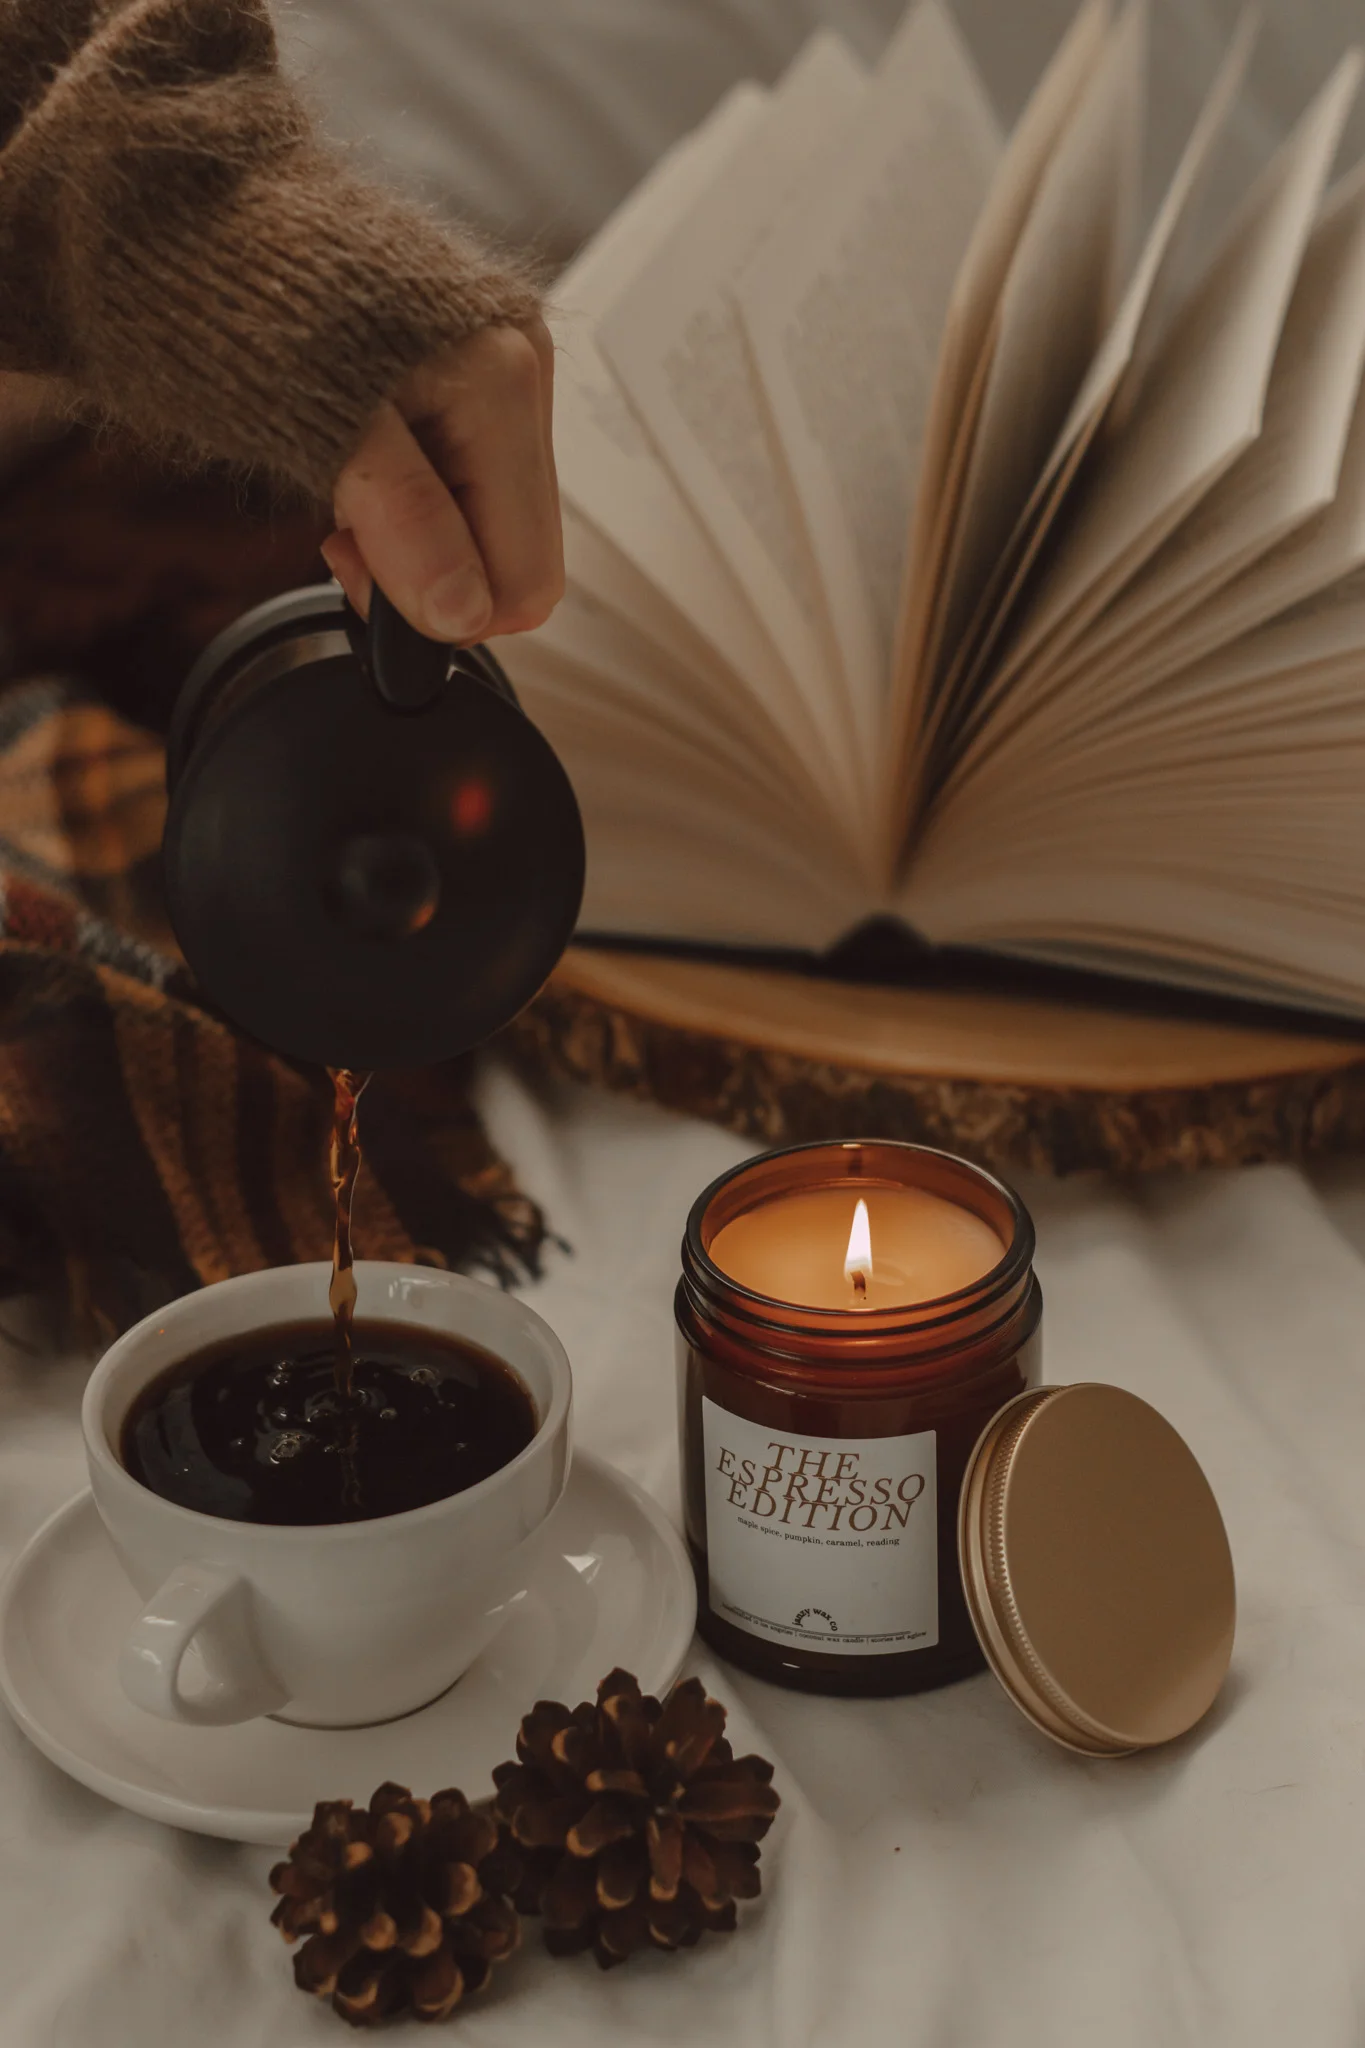 15 Trilogies You Won’t Be Able to Put Down by The Espresso Edition cozy bookish blog